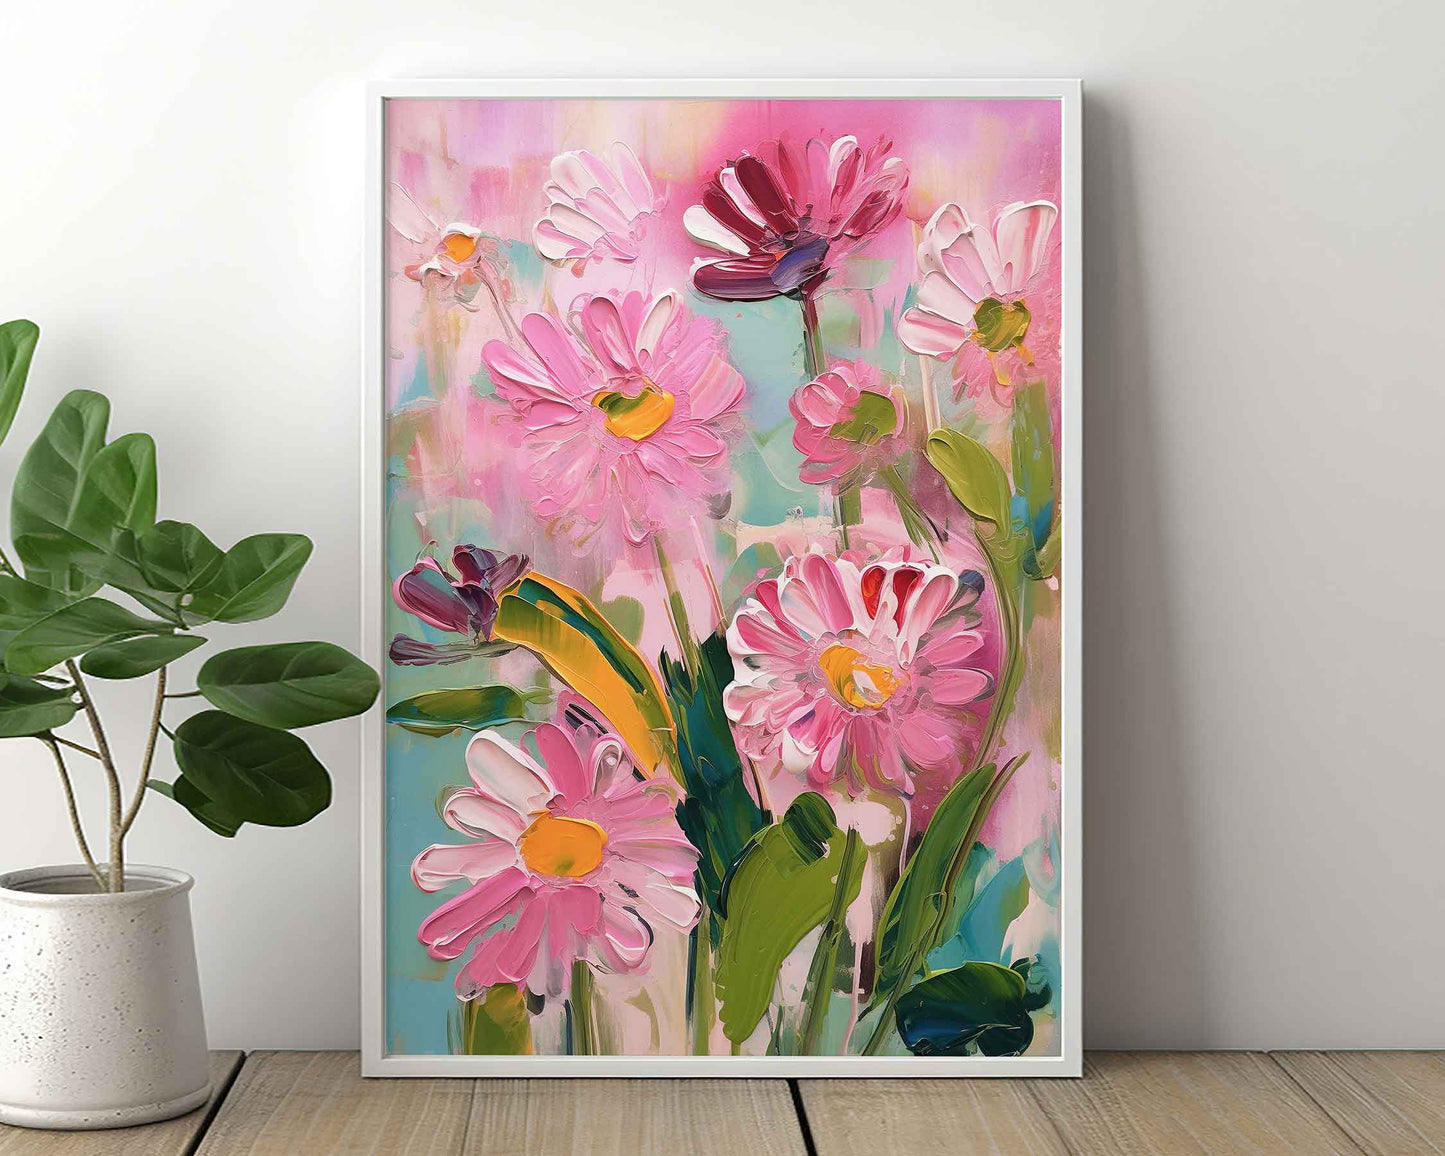 Framed Image of Pink Flowers Abstract Vintage Oil Paintings Wall Art Poster Print Gift